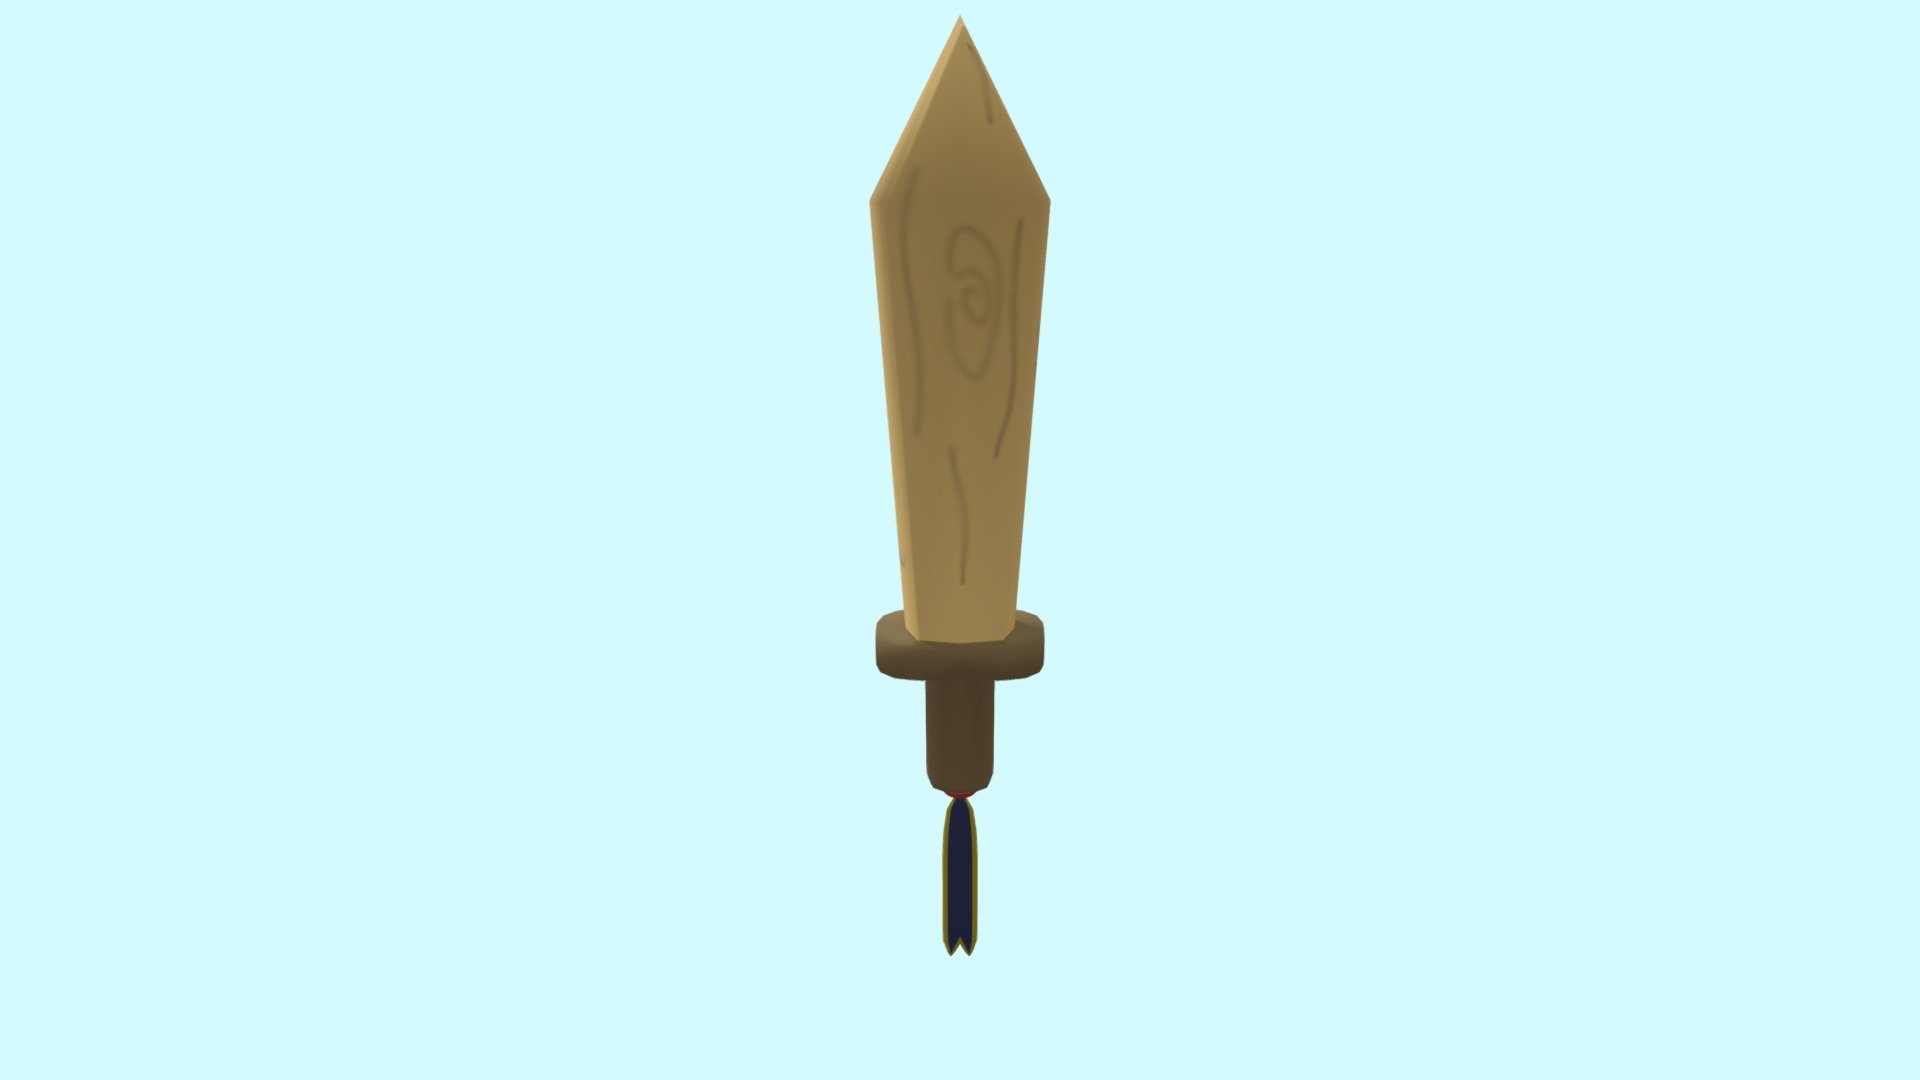 Low poly sword with a cartoon wood texture. Has a ribbon that is rigged. Originally a prop for VRChat 3d model